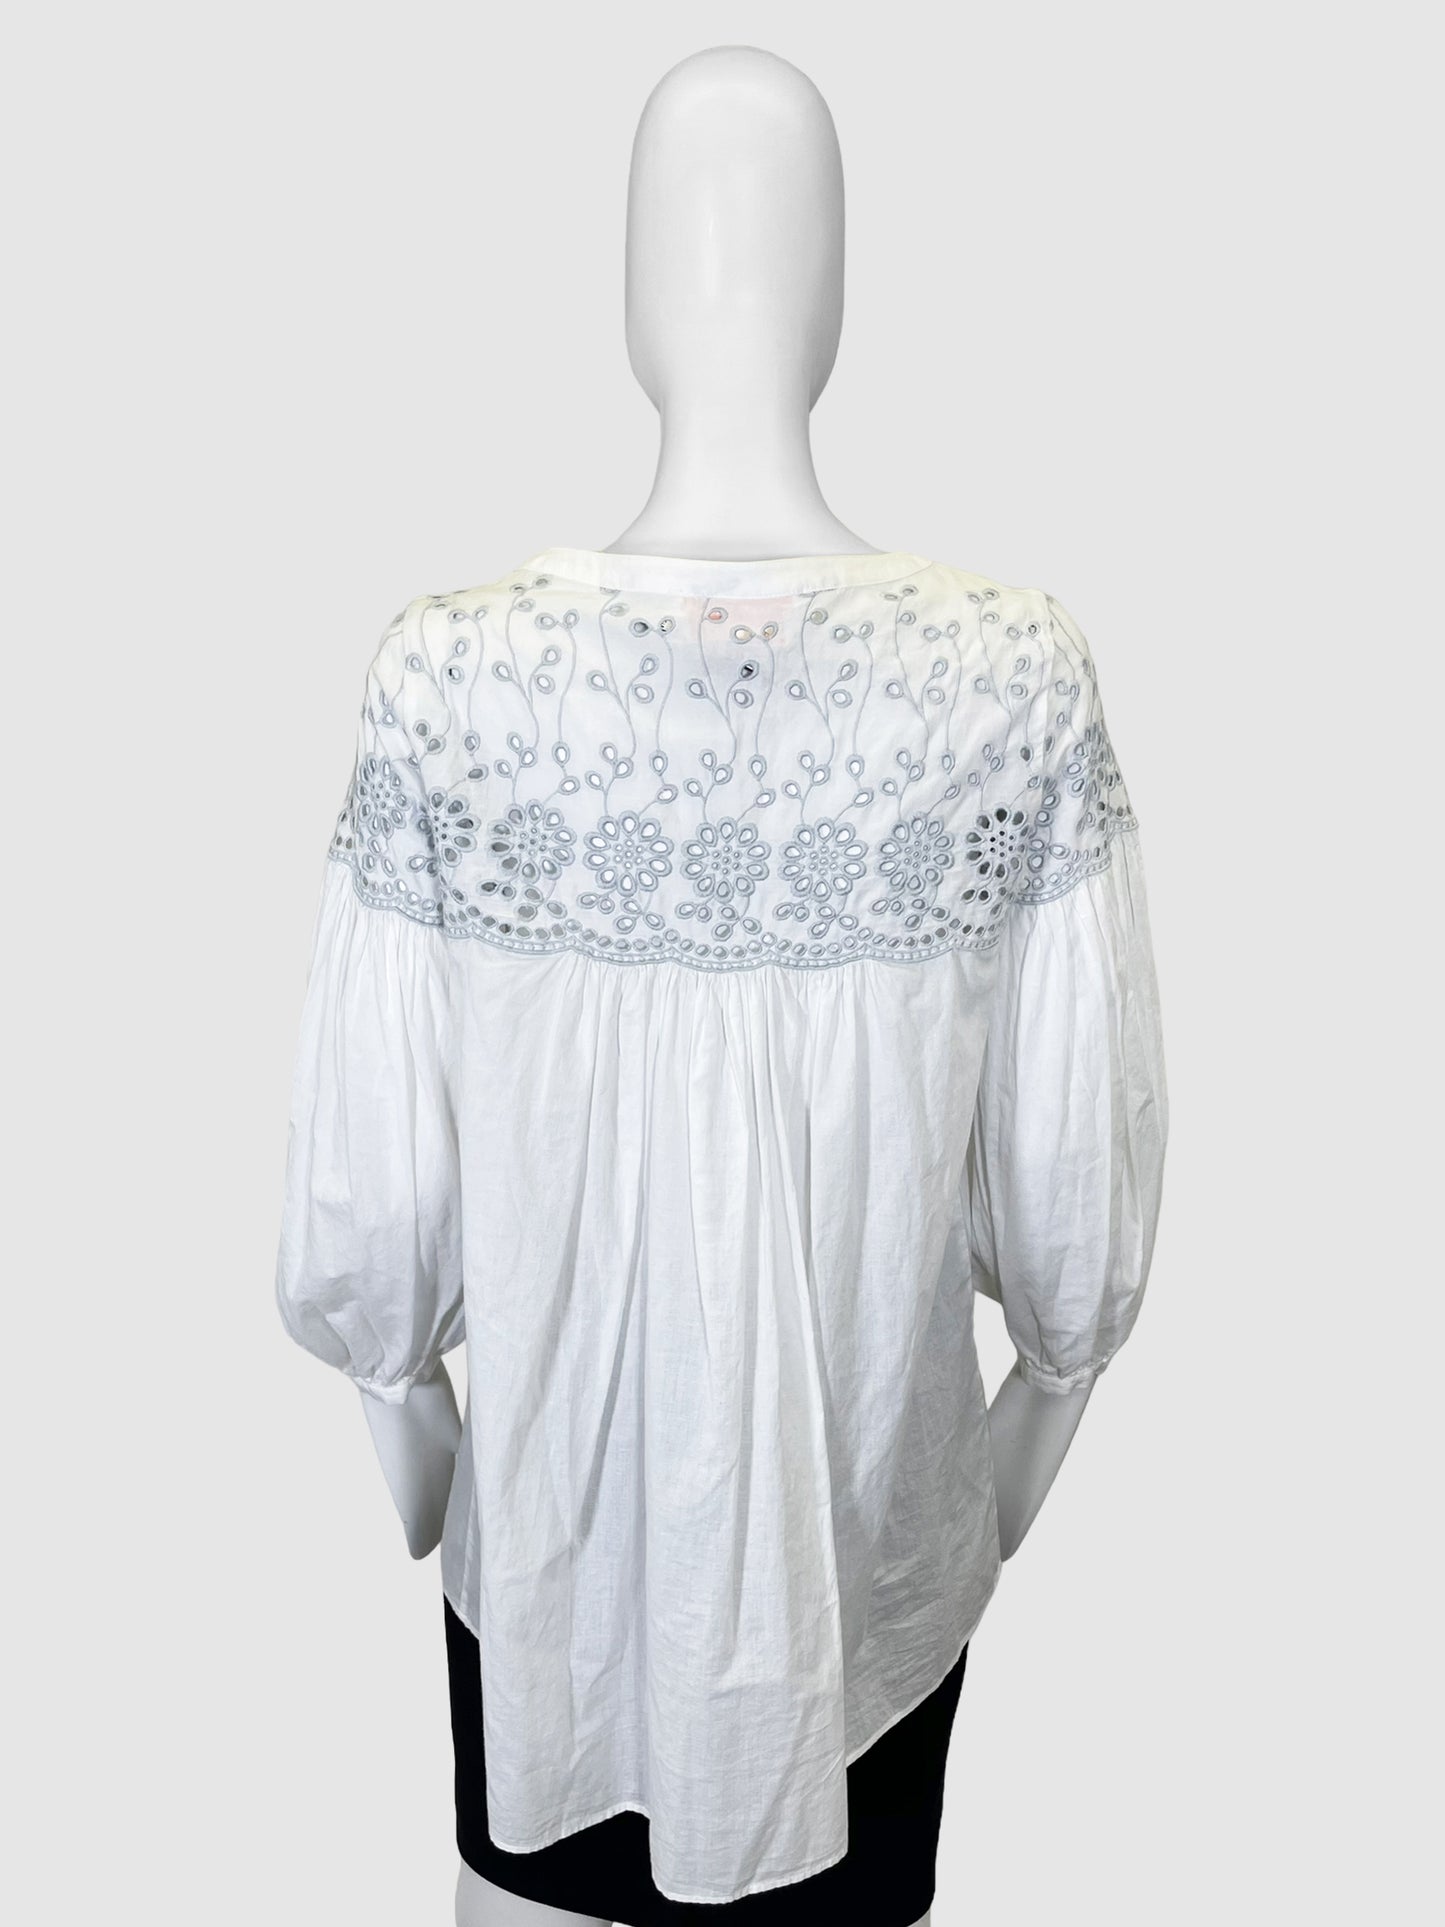 See by Chloe Eyelet Details Blouse - Size 34